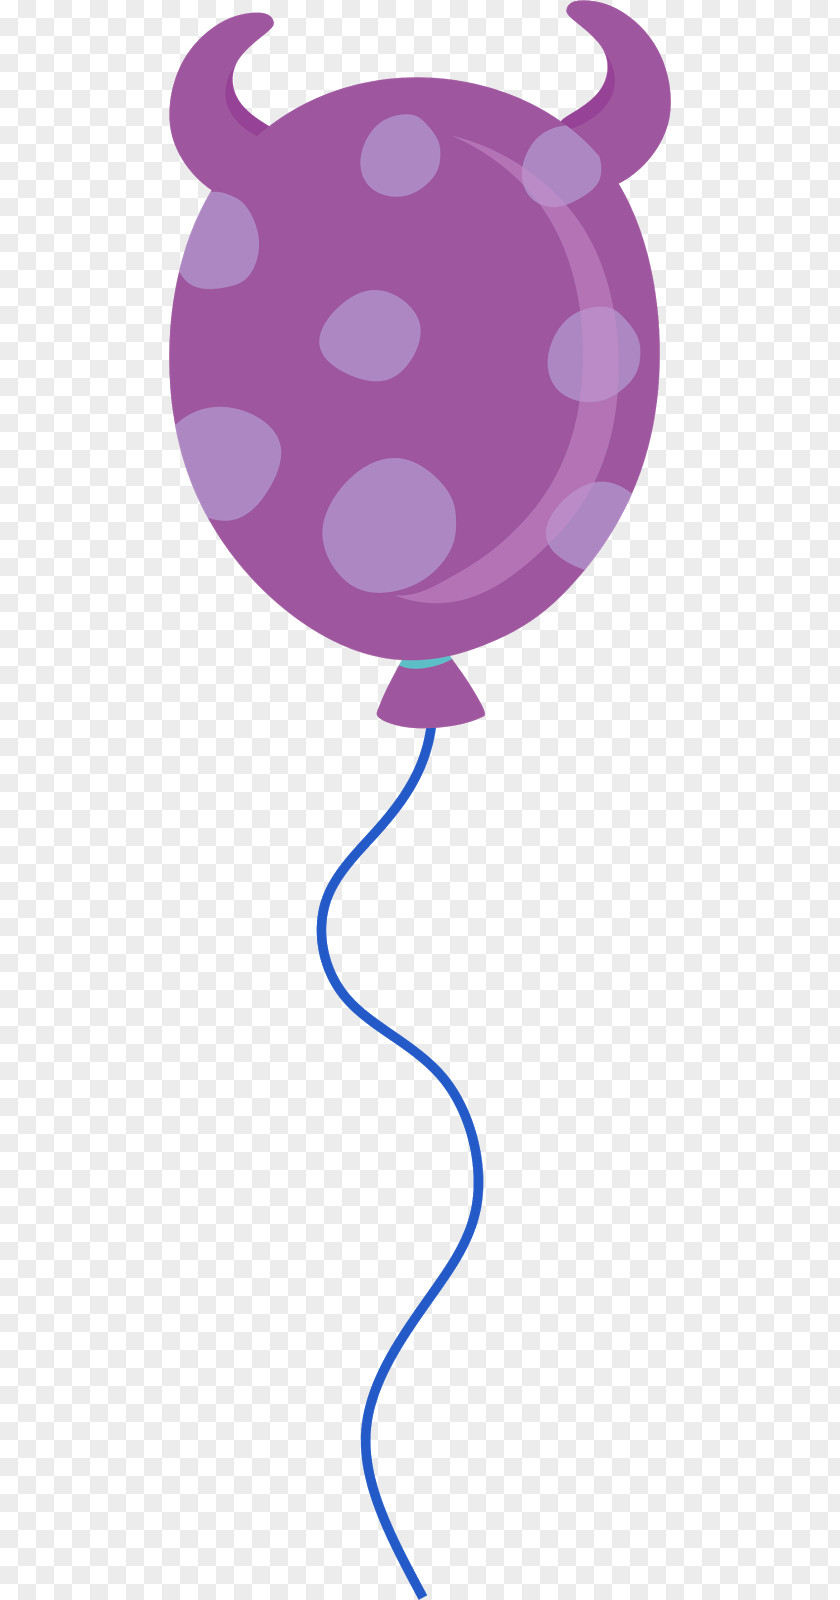 Monsters Inc Mike Wazowski Balloon Boo Monsters, Inc. Clip Art PNG